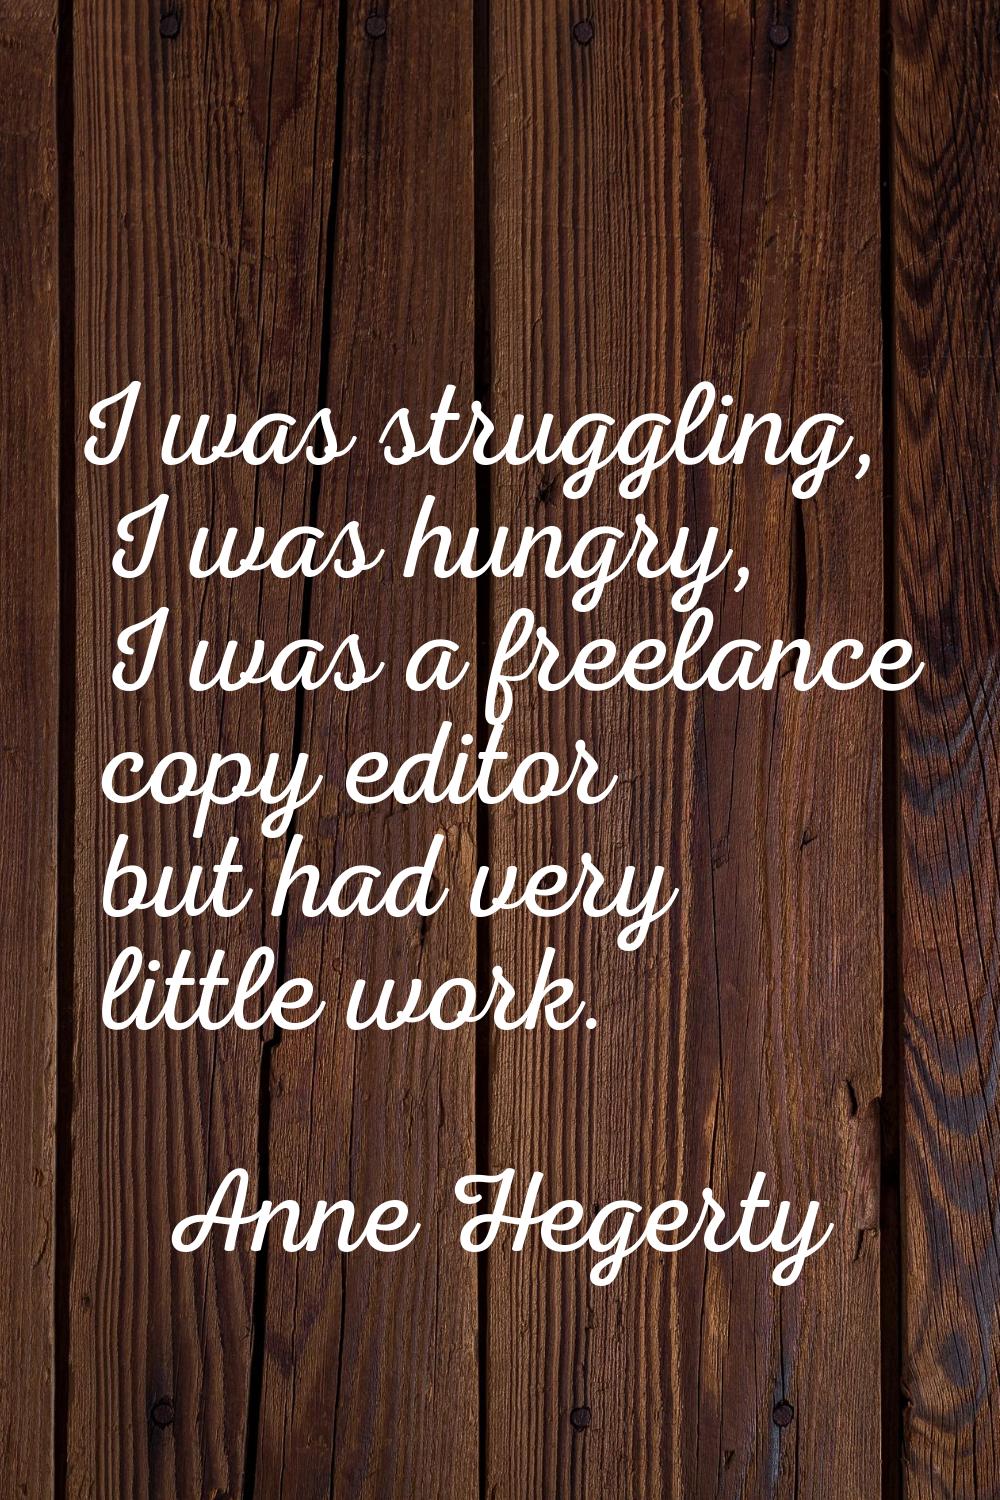 I was struggling, I was hungry, I was a freelance copy editor but had very little work.